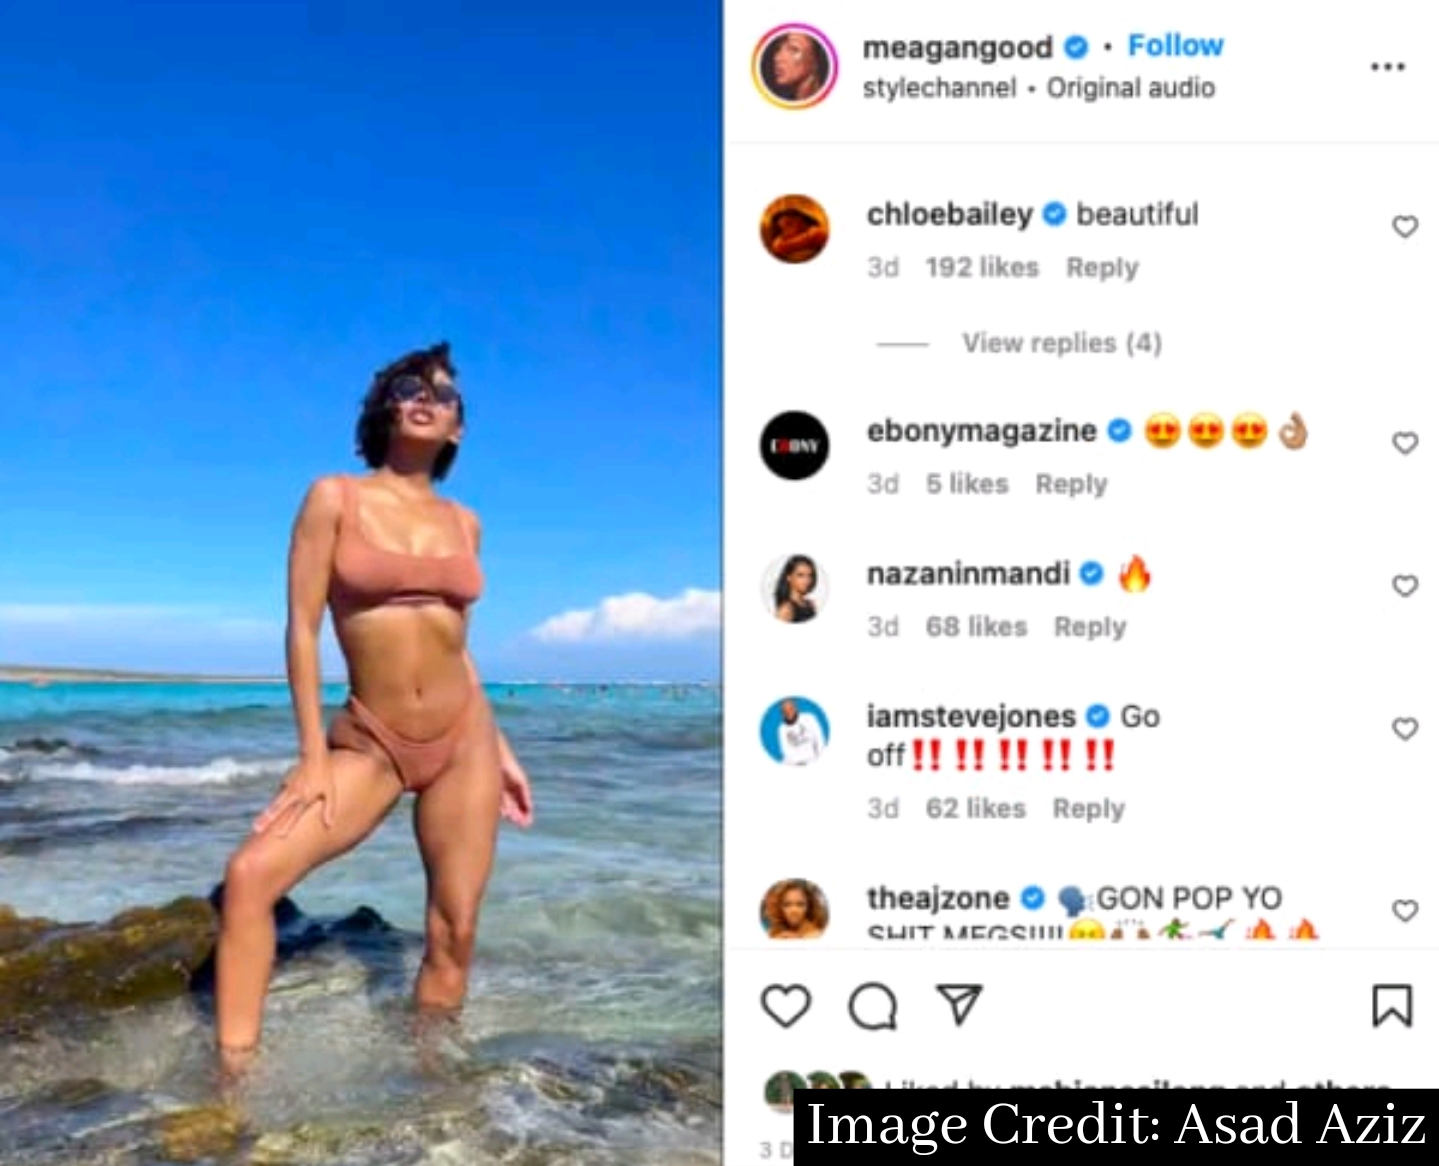 Meagan Good shows off her banging body while going in Italy.